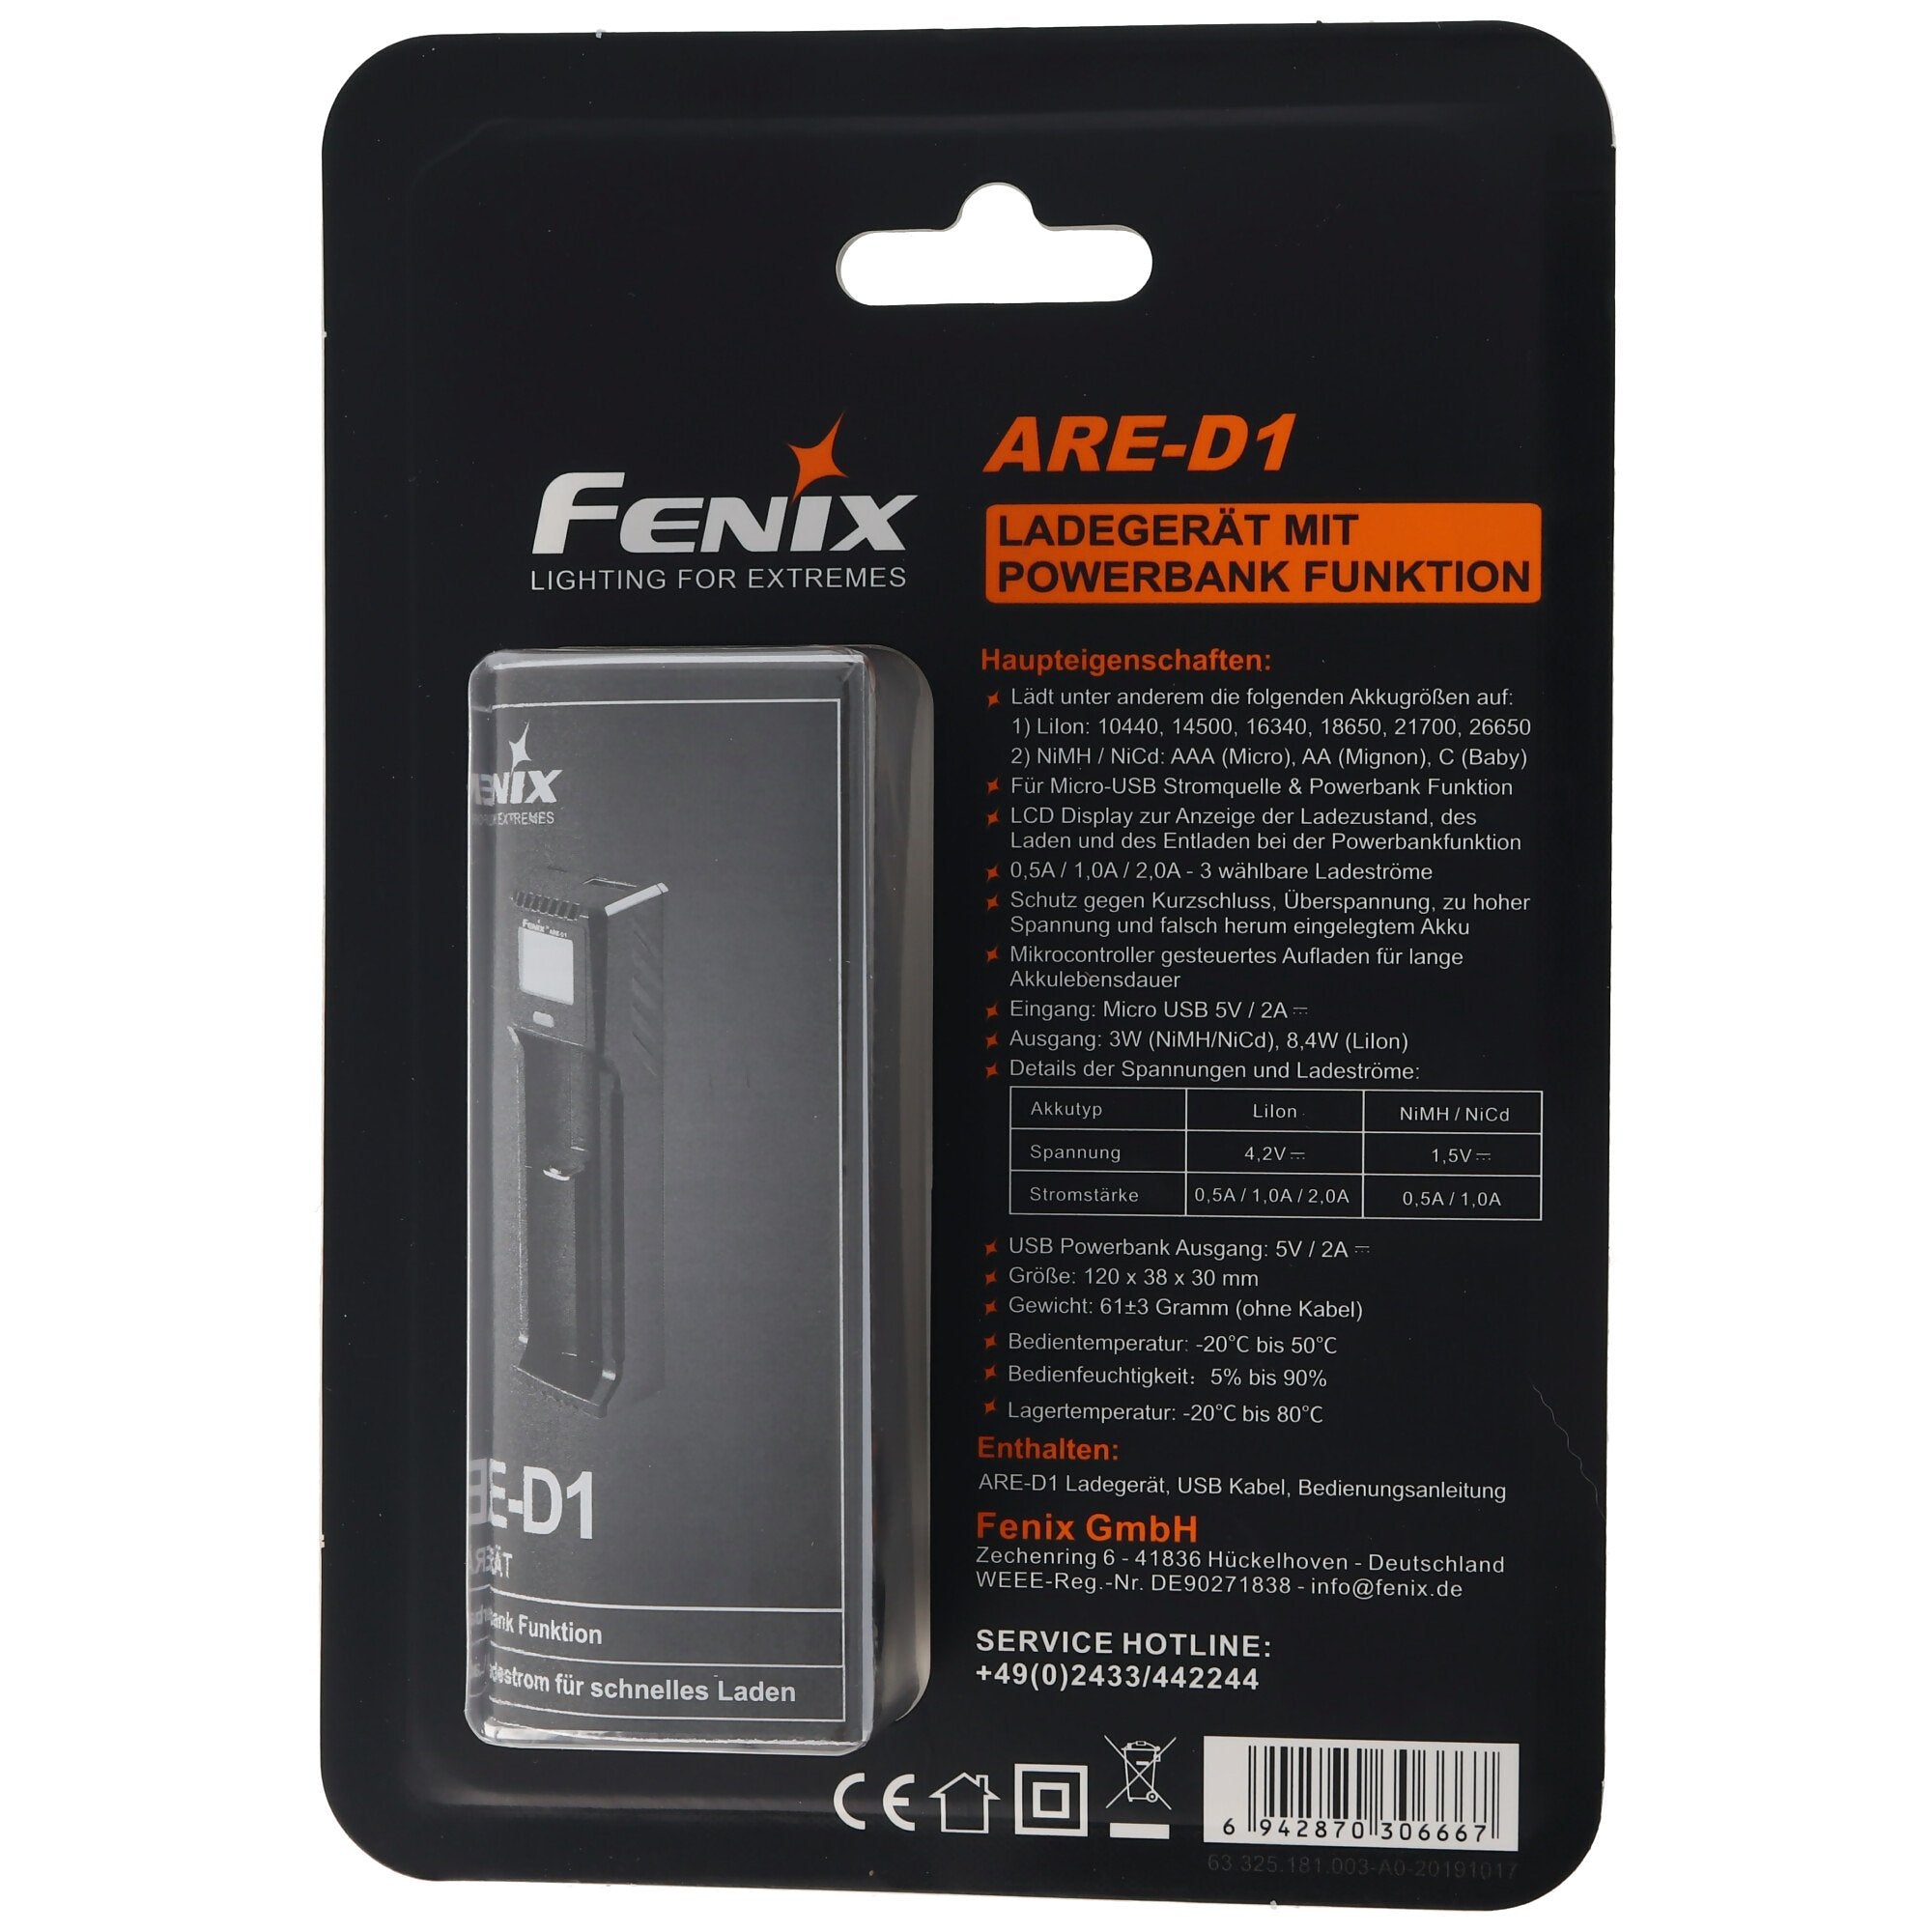 Fenix ARE-D1 single bay charger suitable for 21700, 18650, 26650, 16340, 14500, 10440 Li-Ion, NiMH a